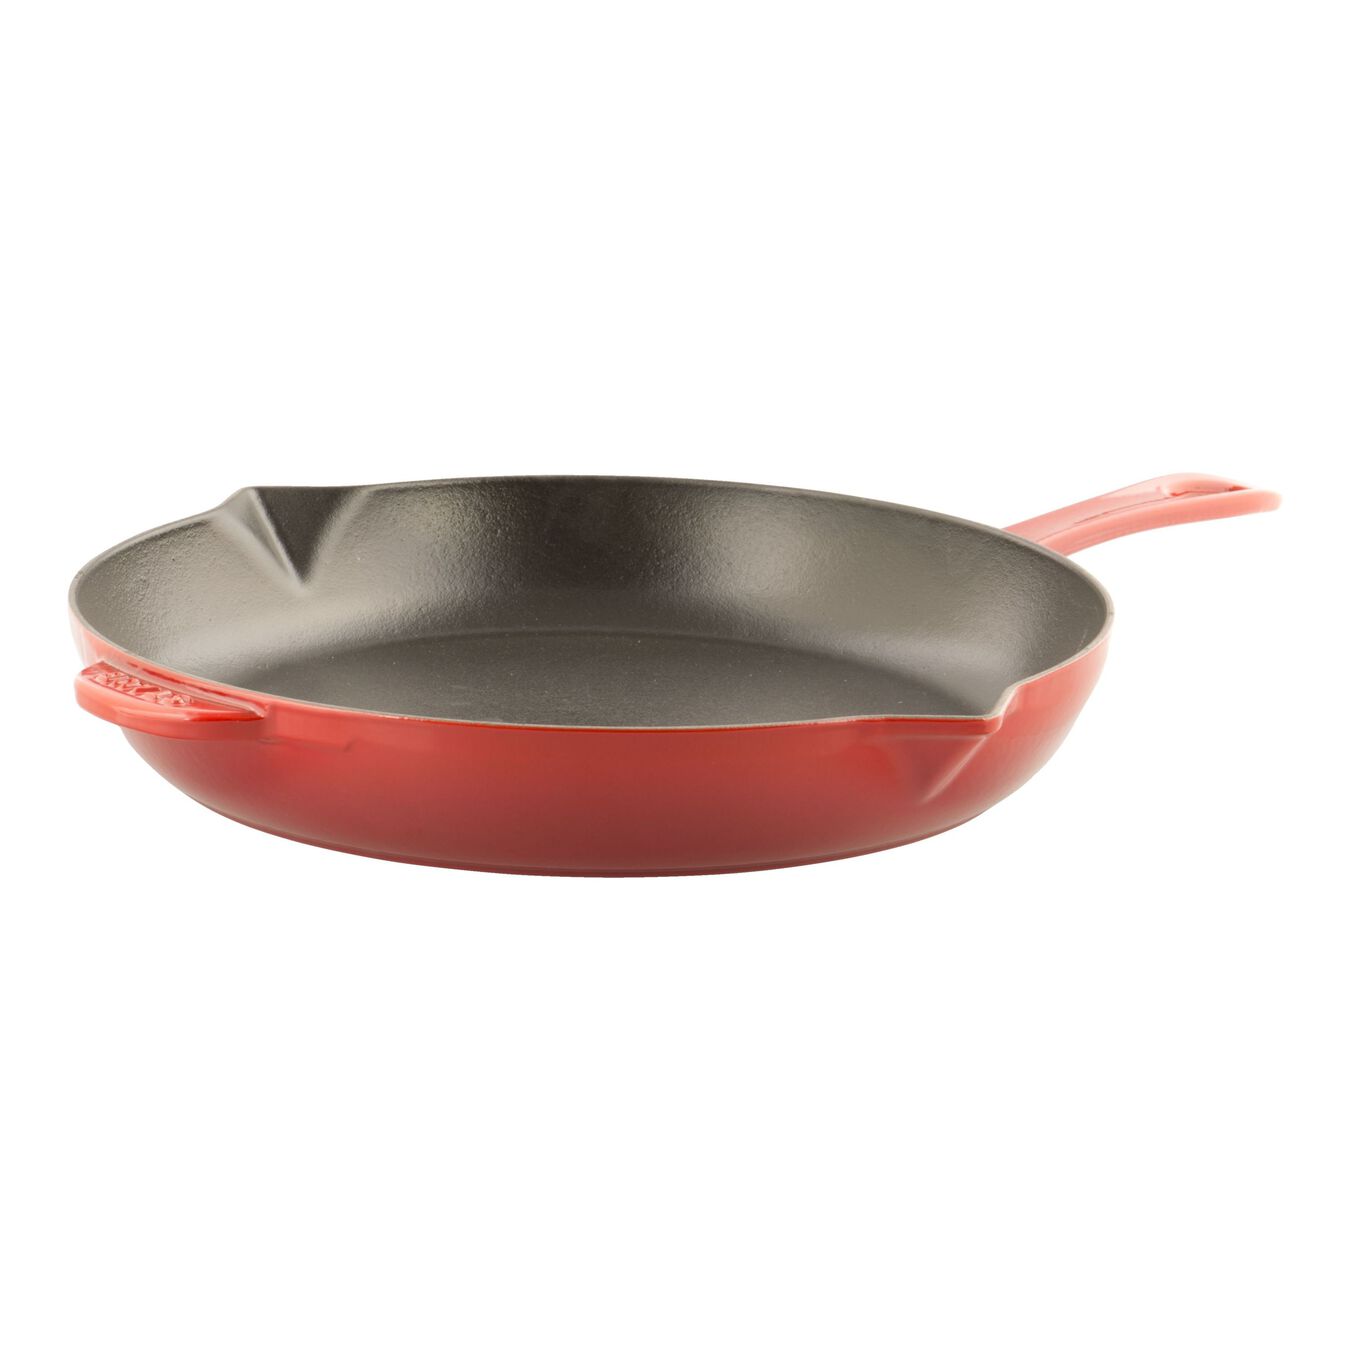 30 cm / 12 inch cast iron Frying pan, cherry - Visual Imperfections,,large 1